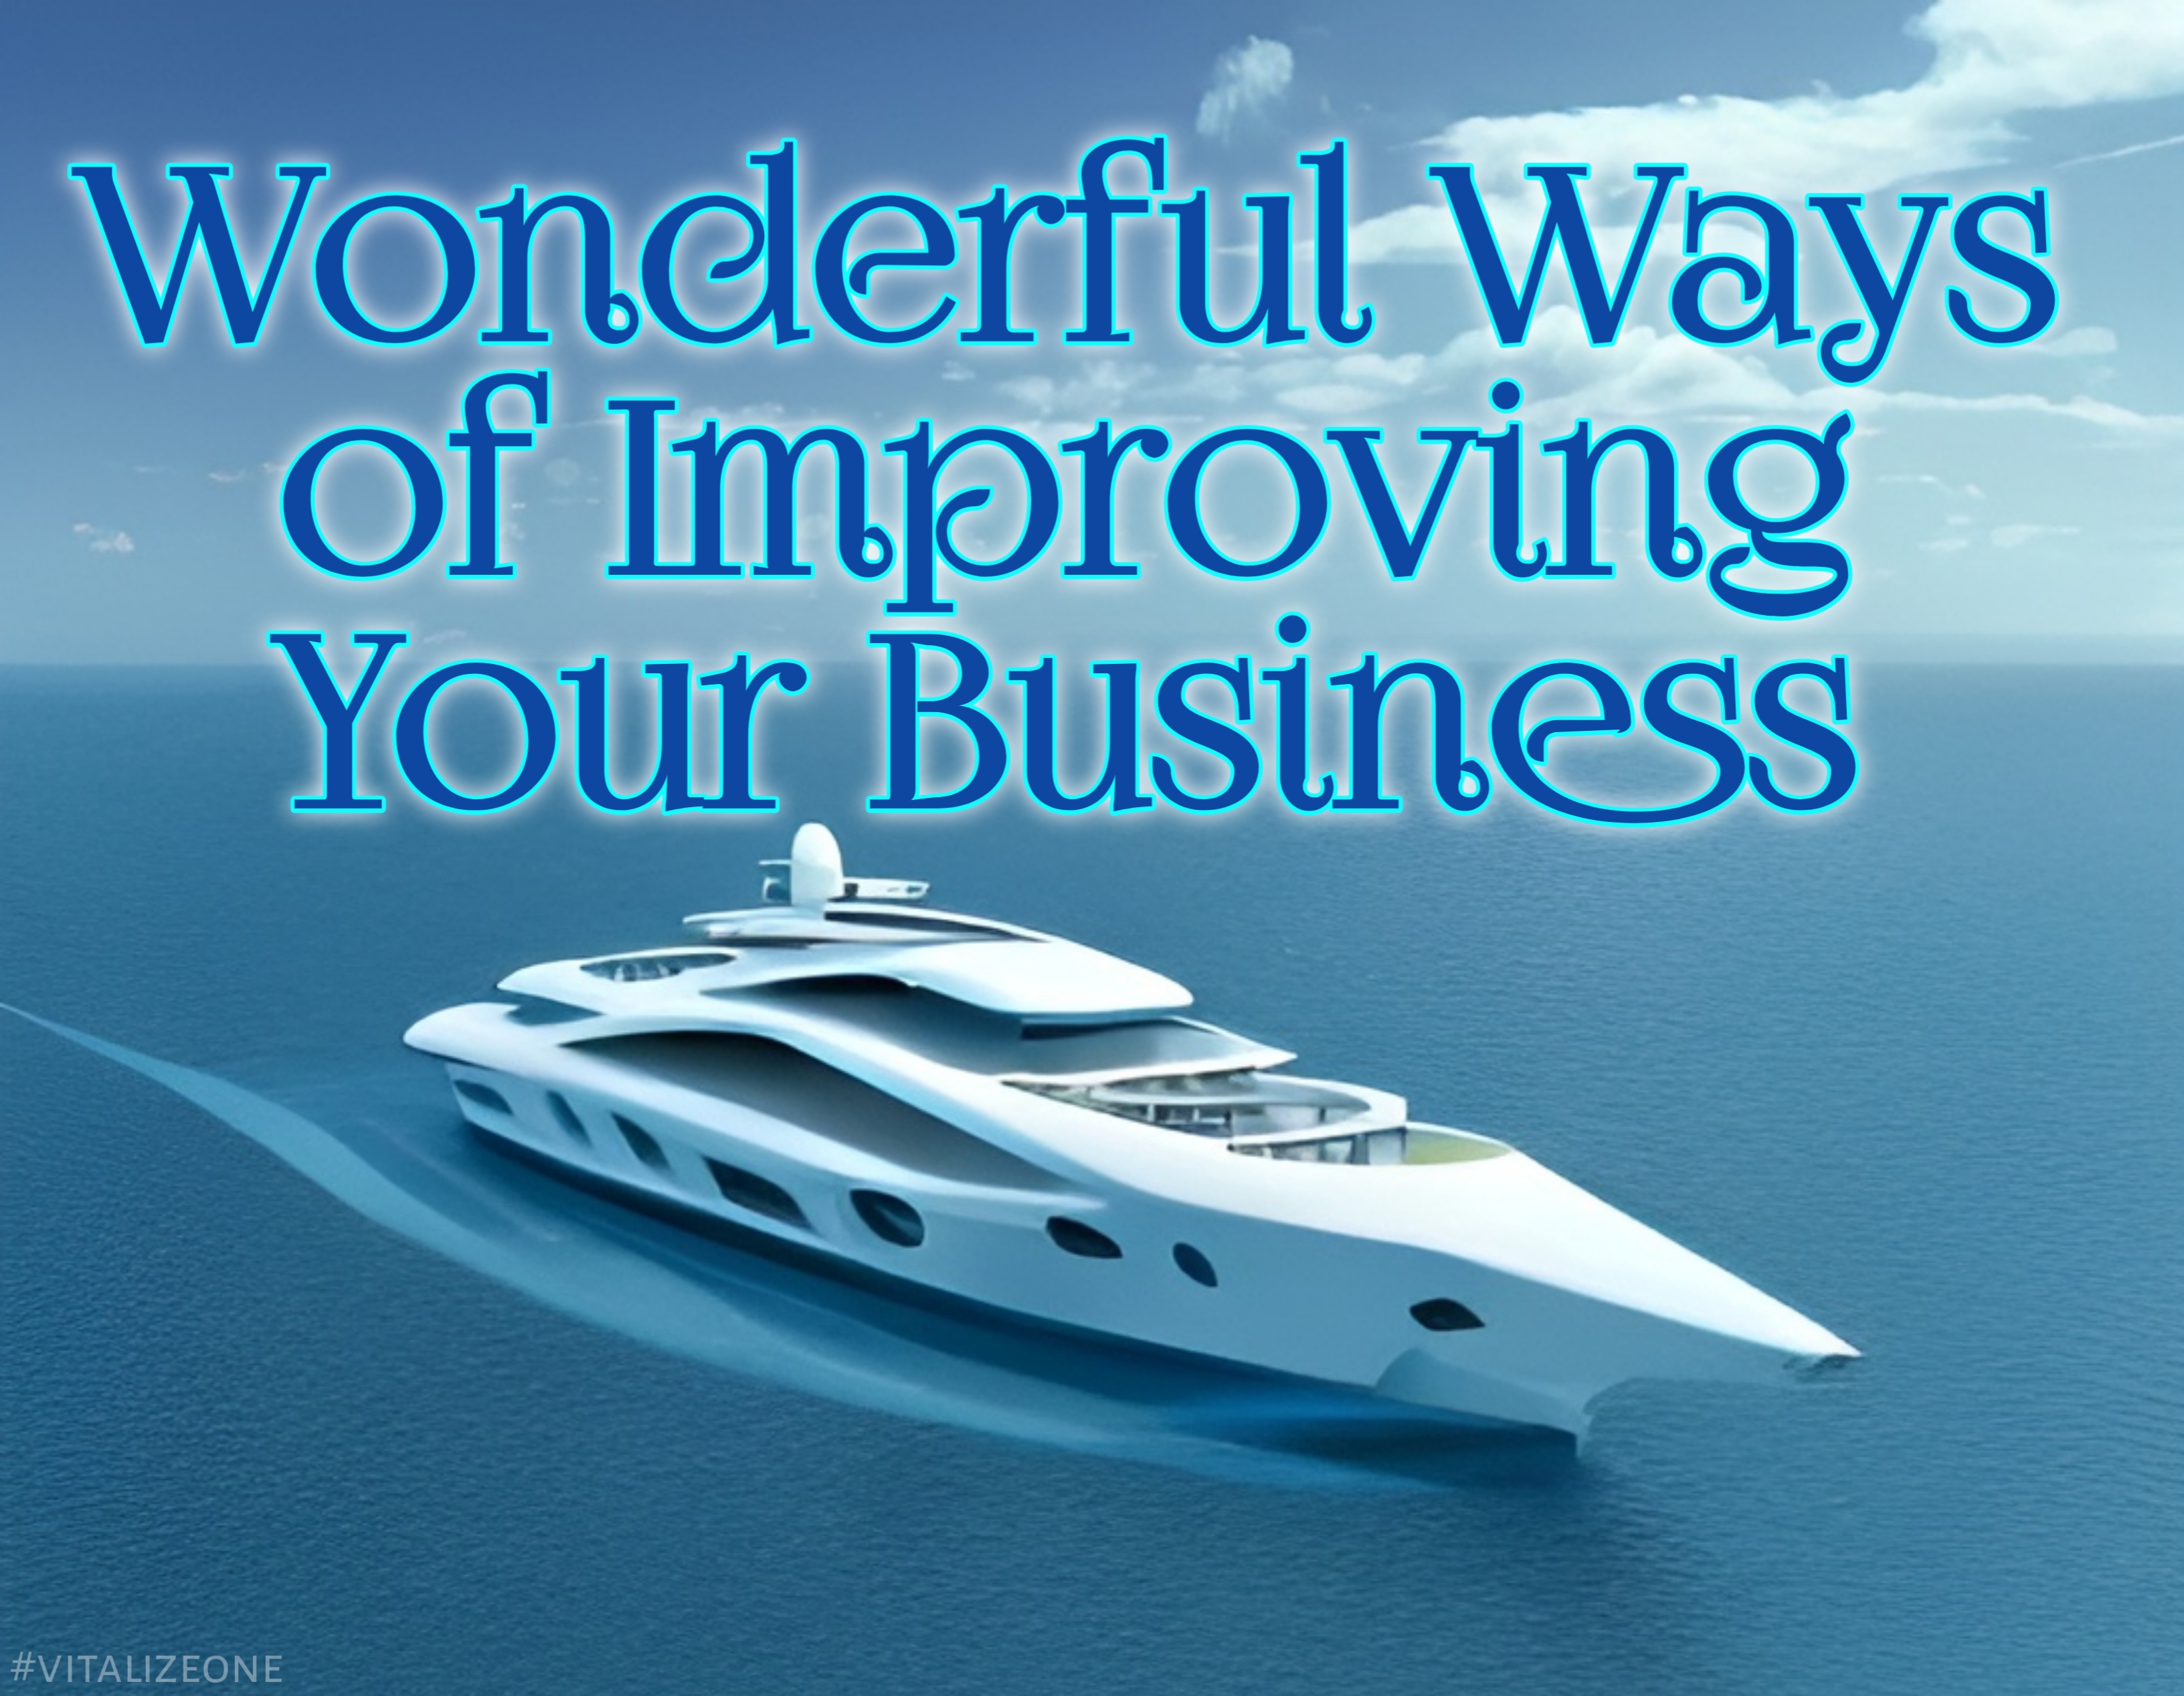 Wonderful Ways of Improving Your Business | Team VitalyTennant.com | VitalyTennant.com | #vitalizeone